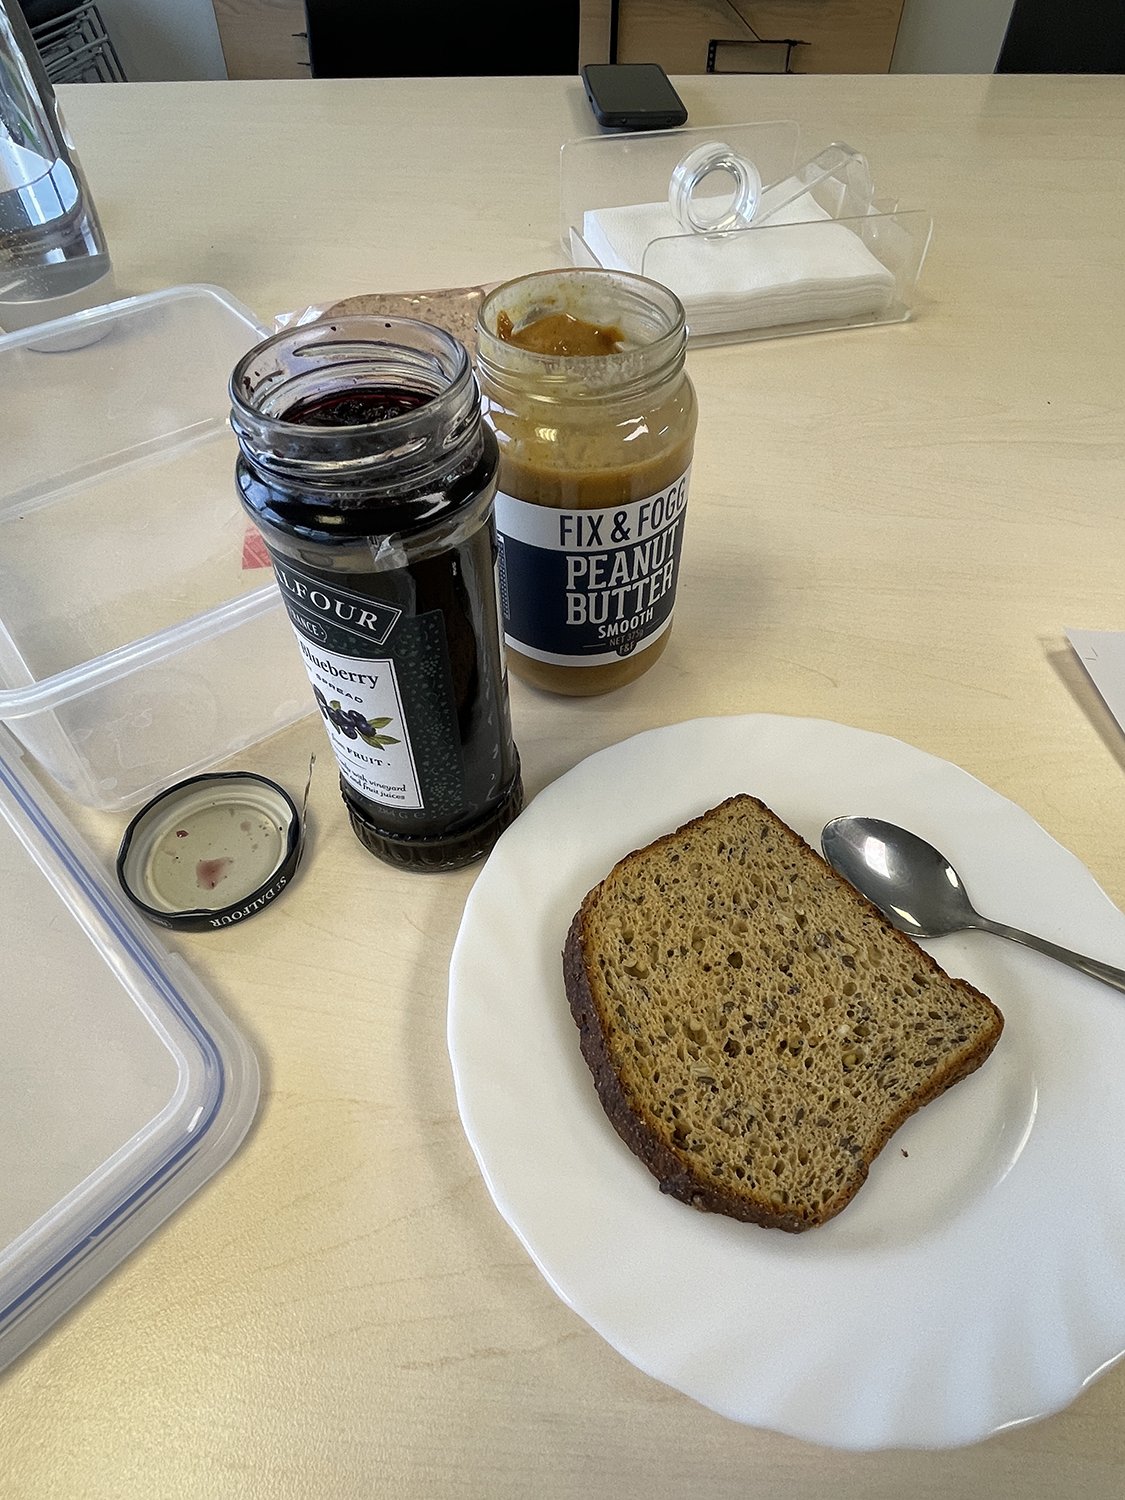 A peanut butter and jelly sandwich can add 4 minutes to your life